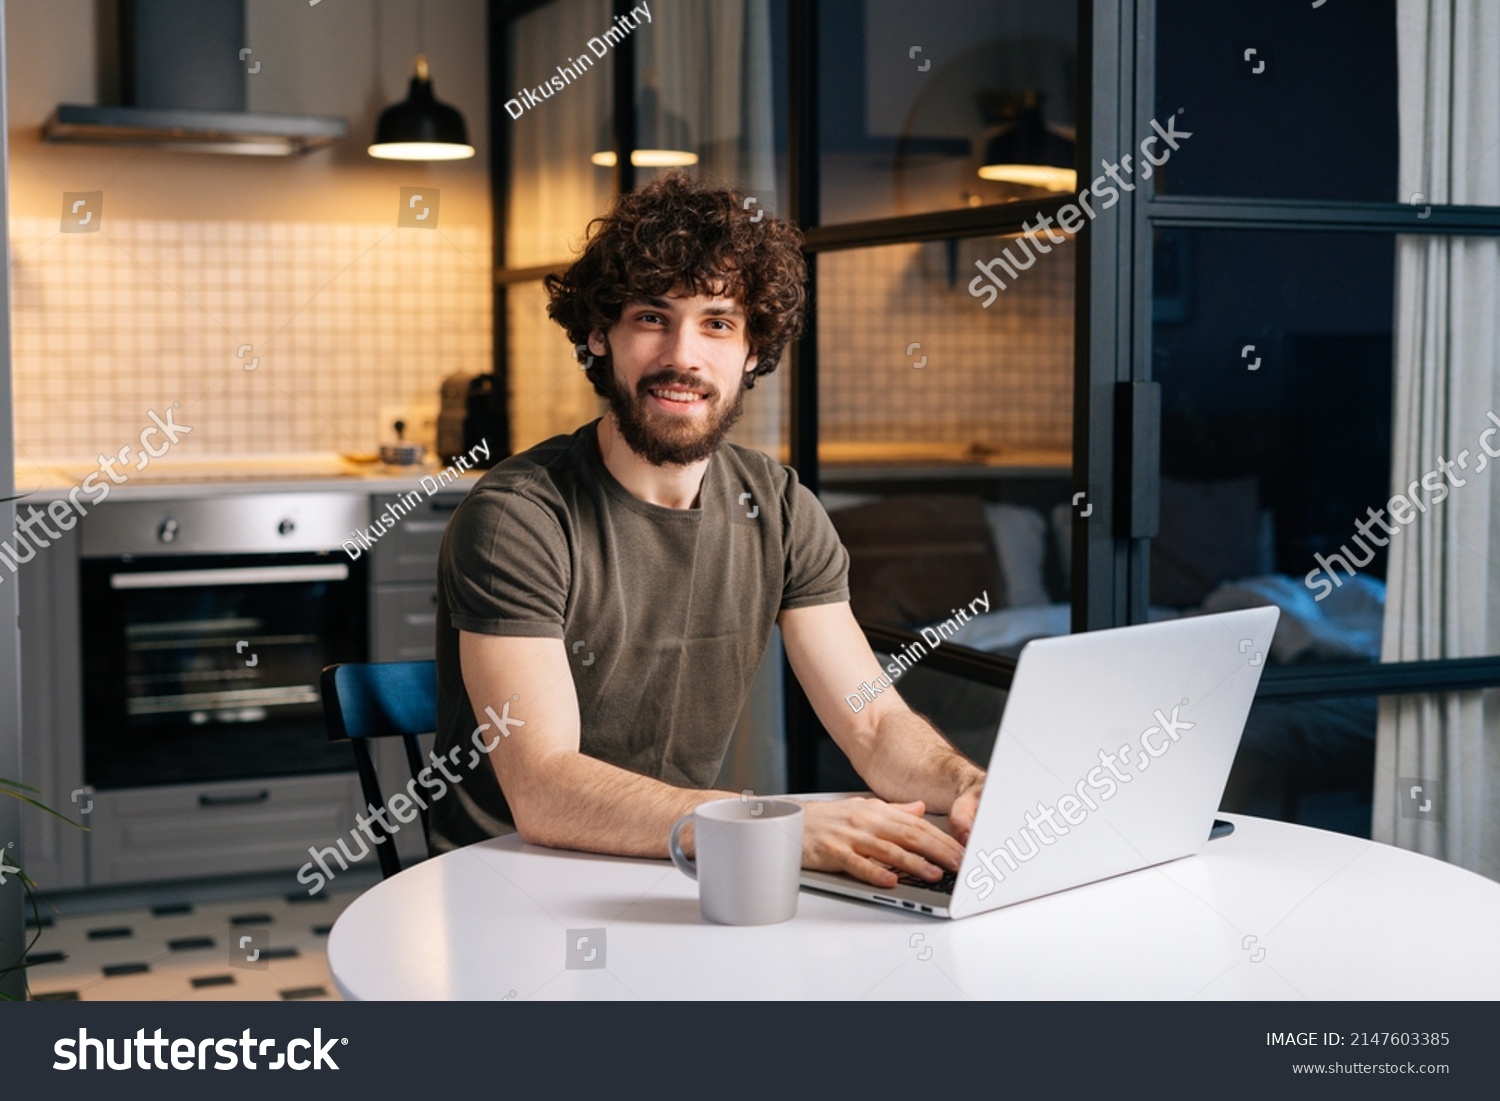 Portrait of cheerful bearded young man using typing on laptop sitting at table in kitchen room with modern interior, looking at camera. Confedent curly happy freelancer male remote working from home. #2147603385